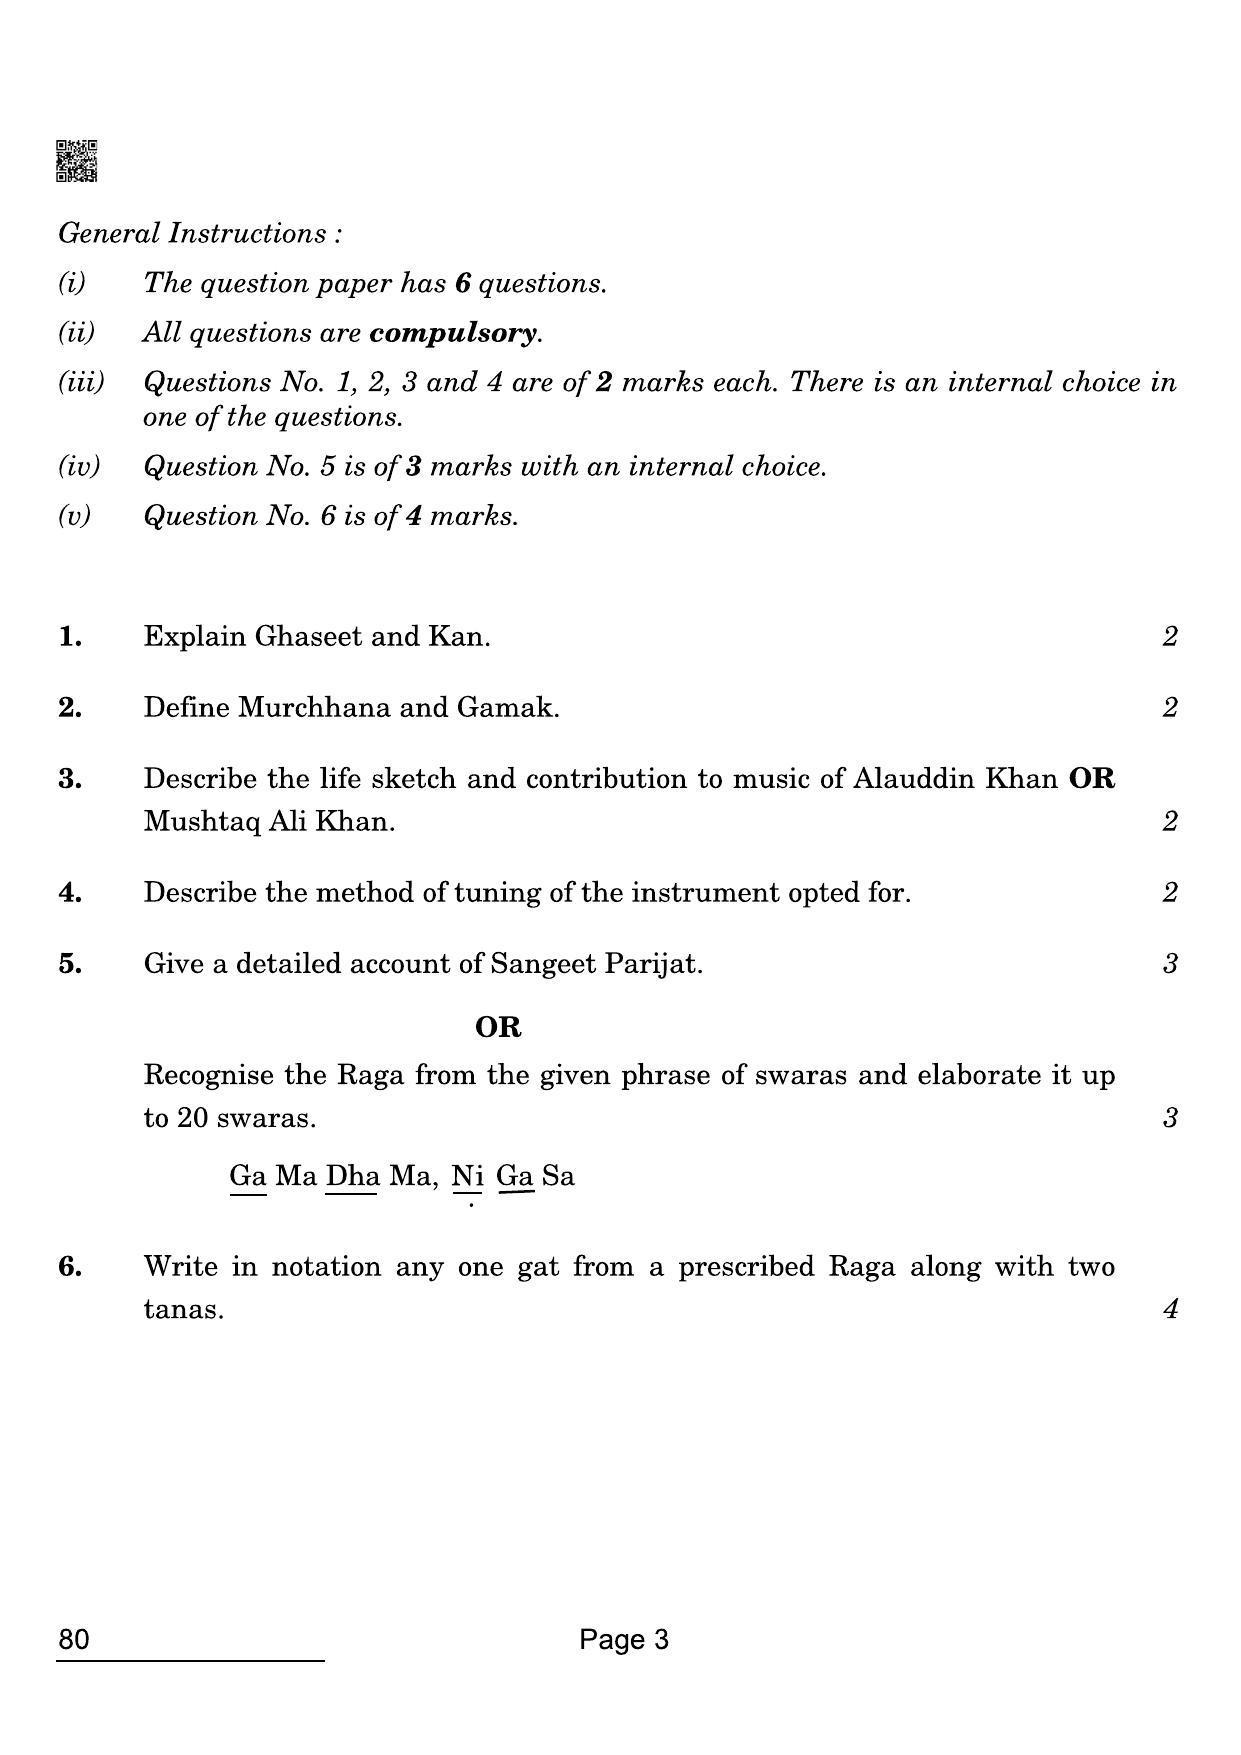 CBSE Class 12 80 Hindustani Music Melodic 2022 Compartment Question Paper - Page 3